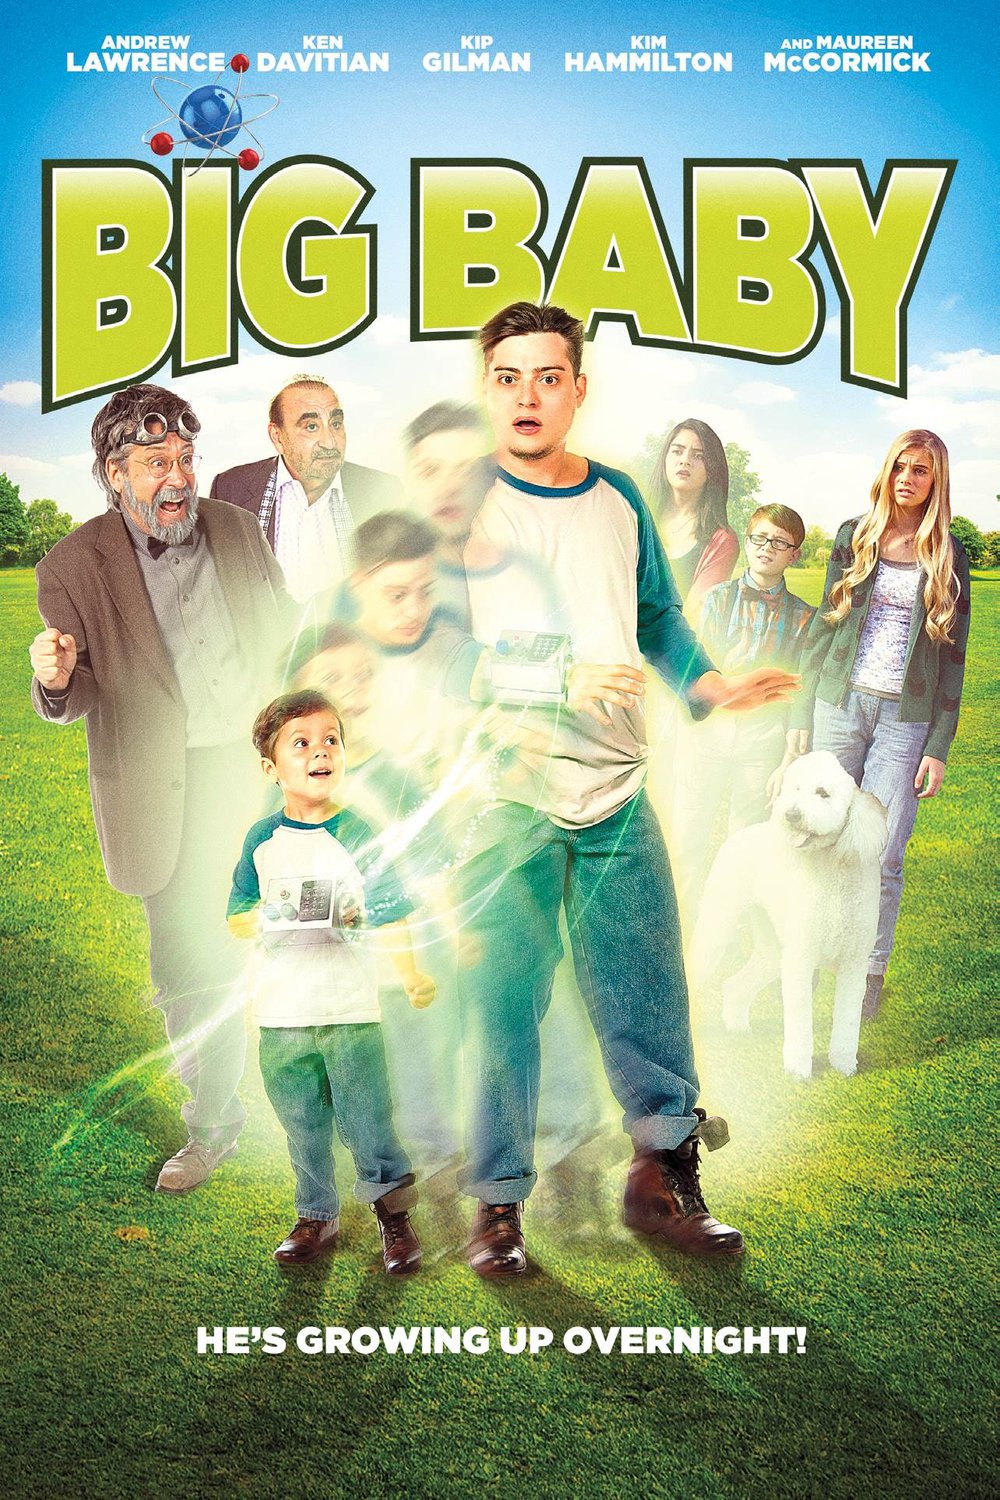 Poster of the movie Big Baby